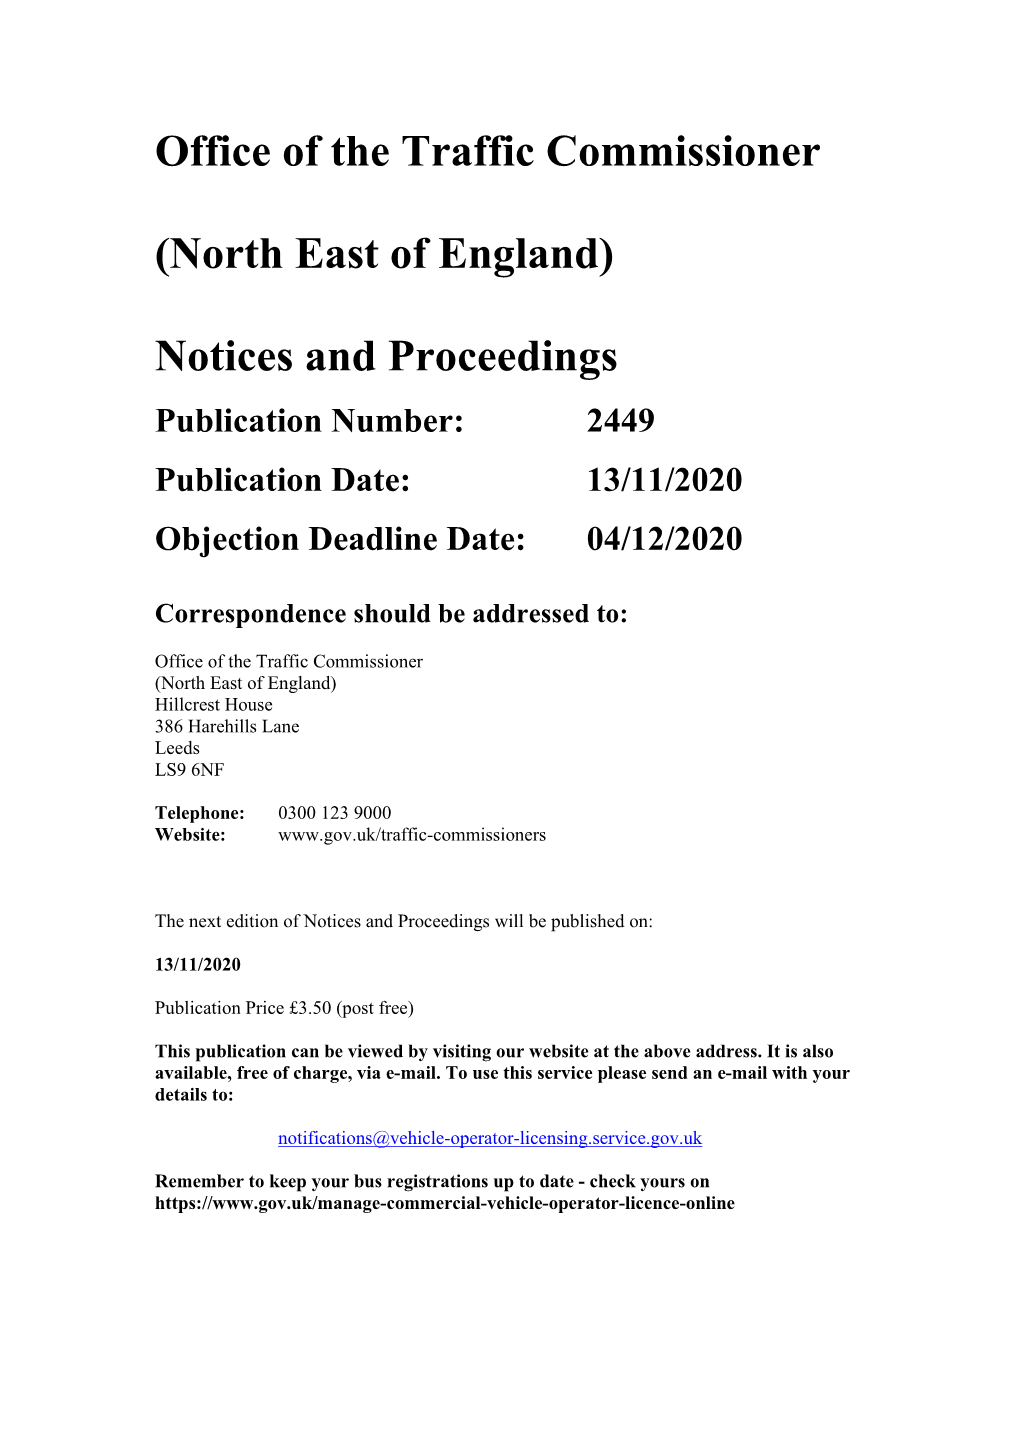 Notices and Proceedings for the North East of England 2449